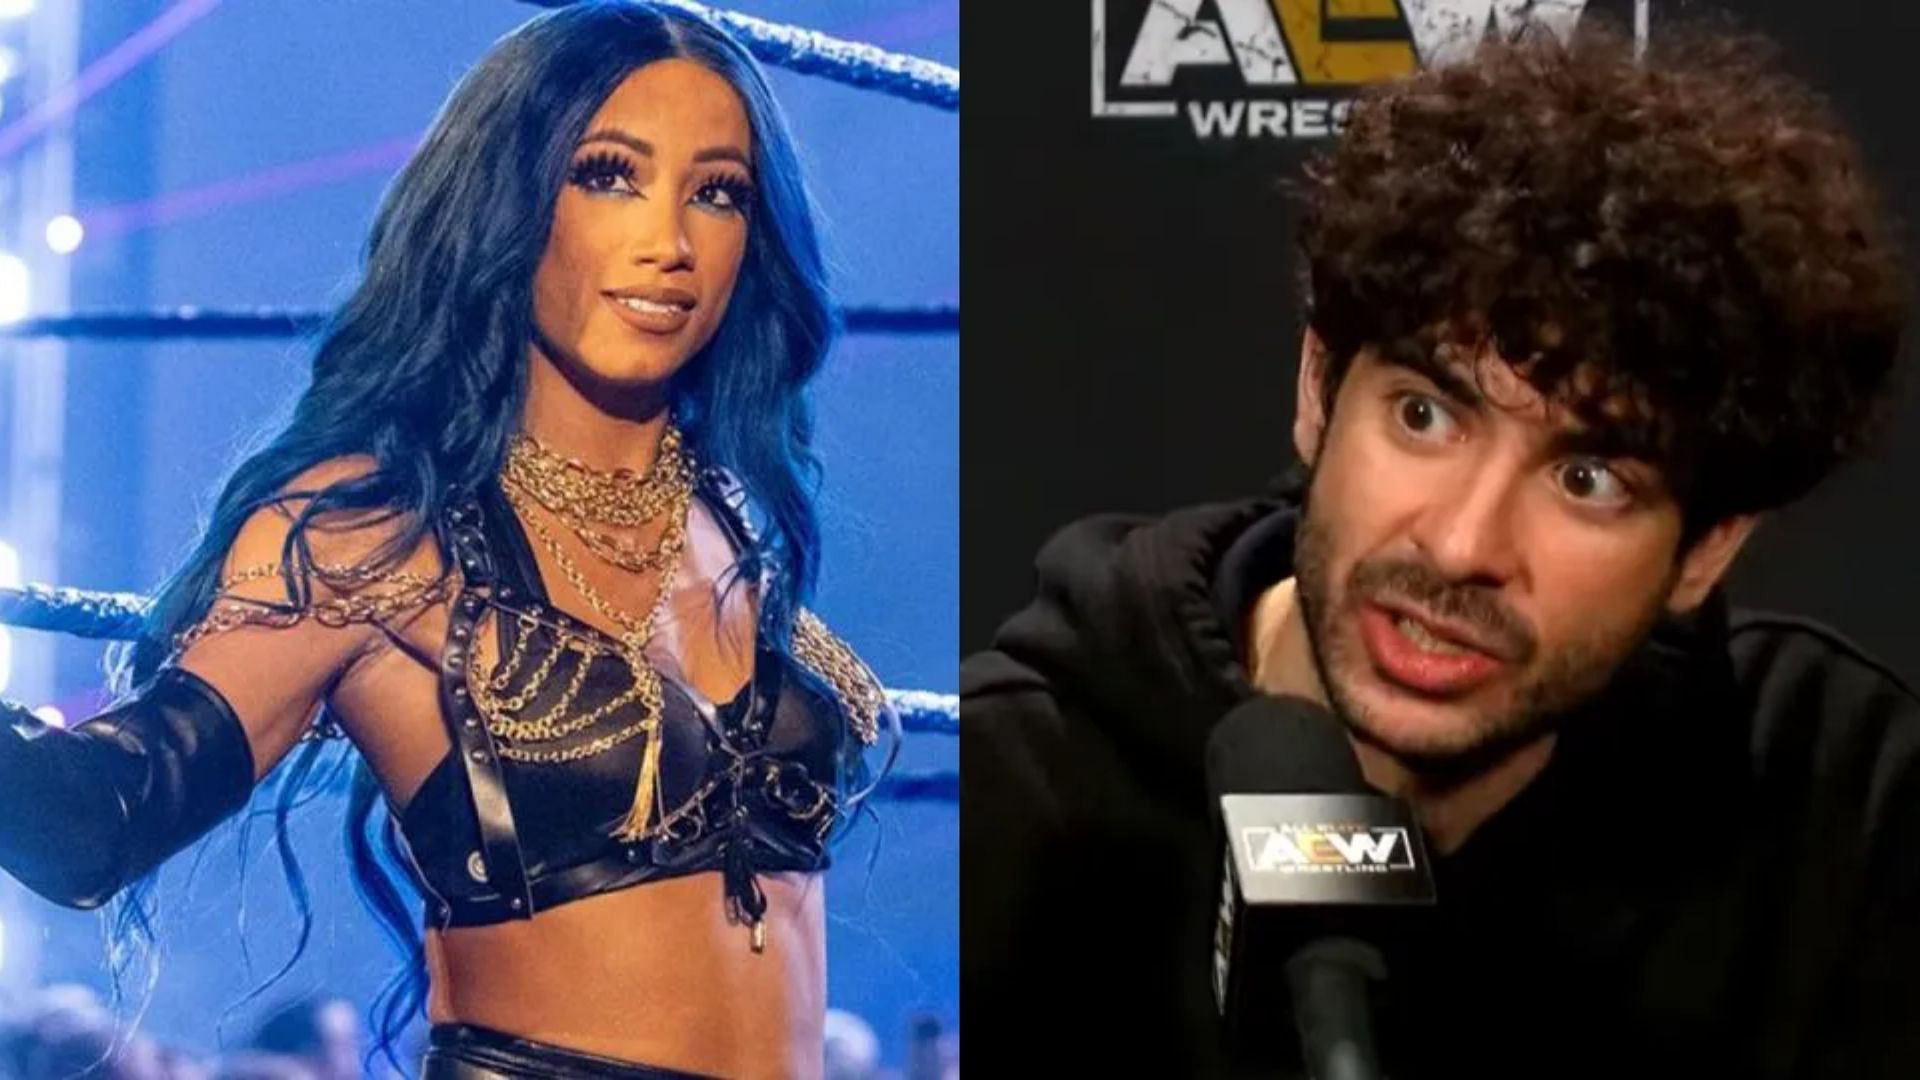 Mercedes Mone was in attendance at AEW All In pay-per-view